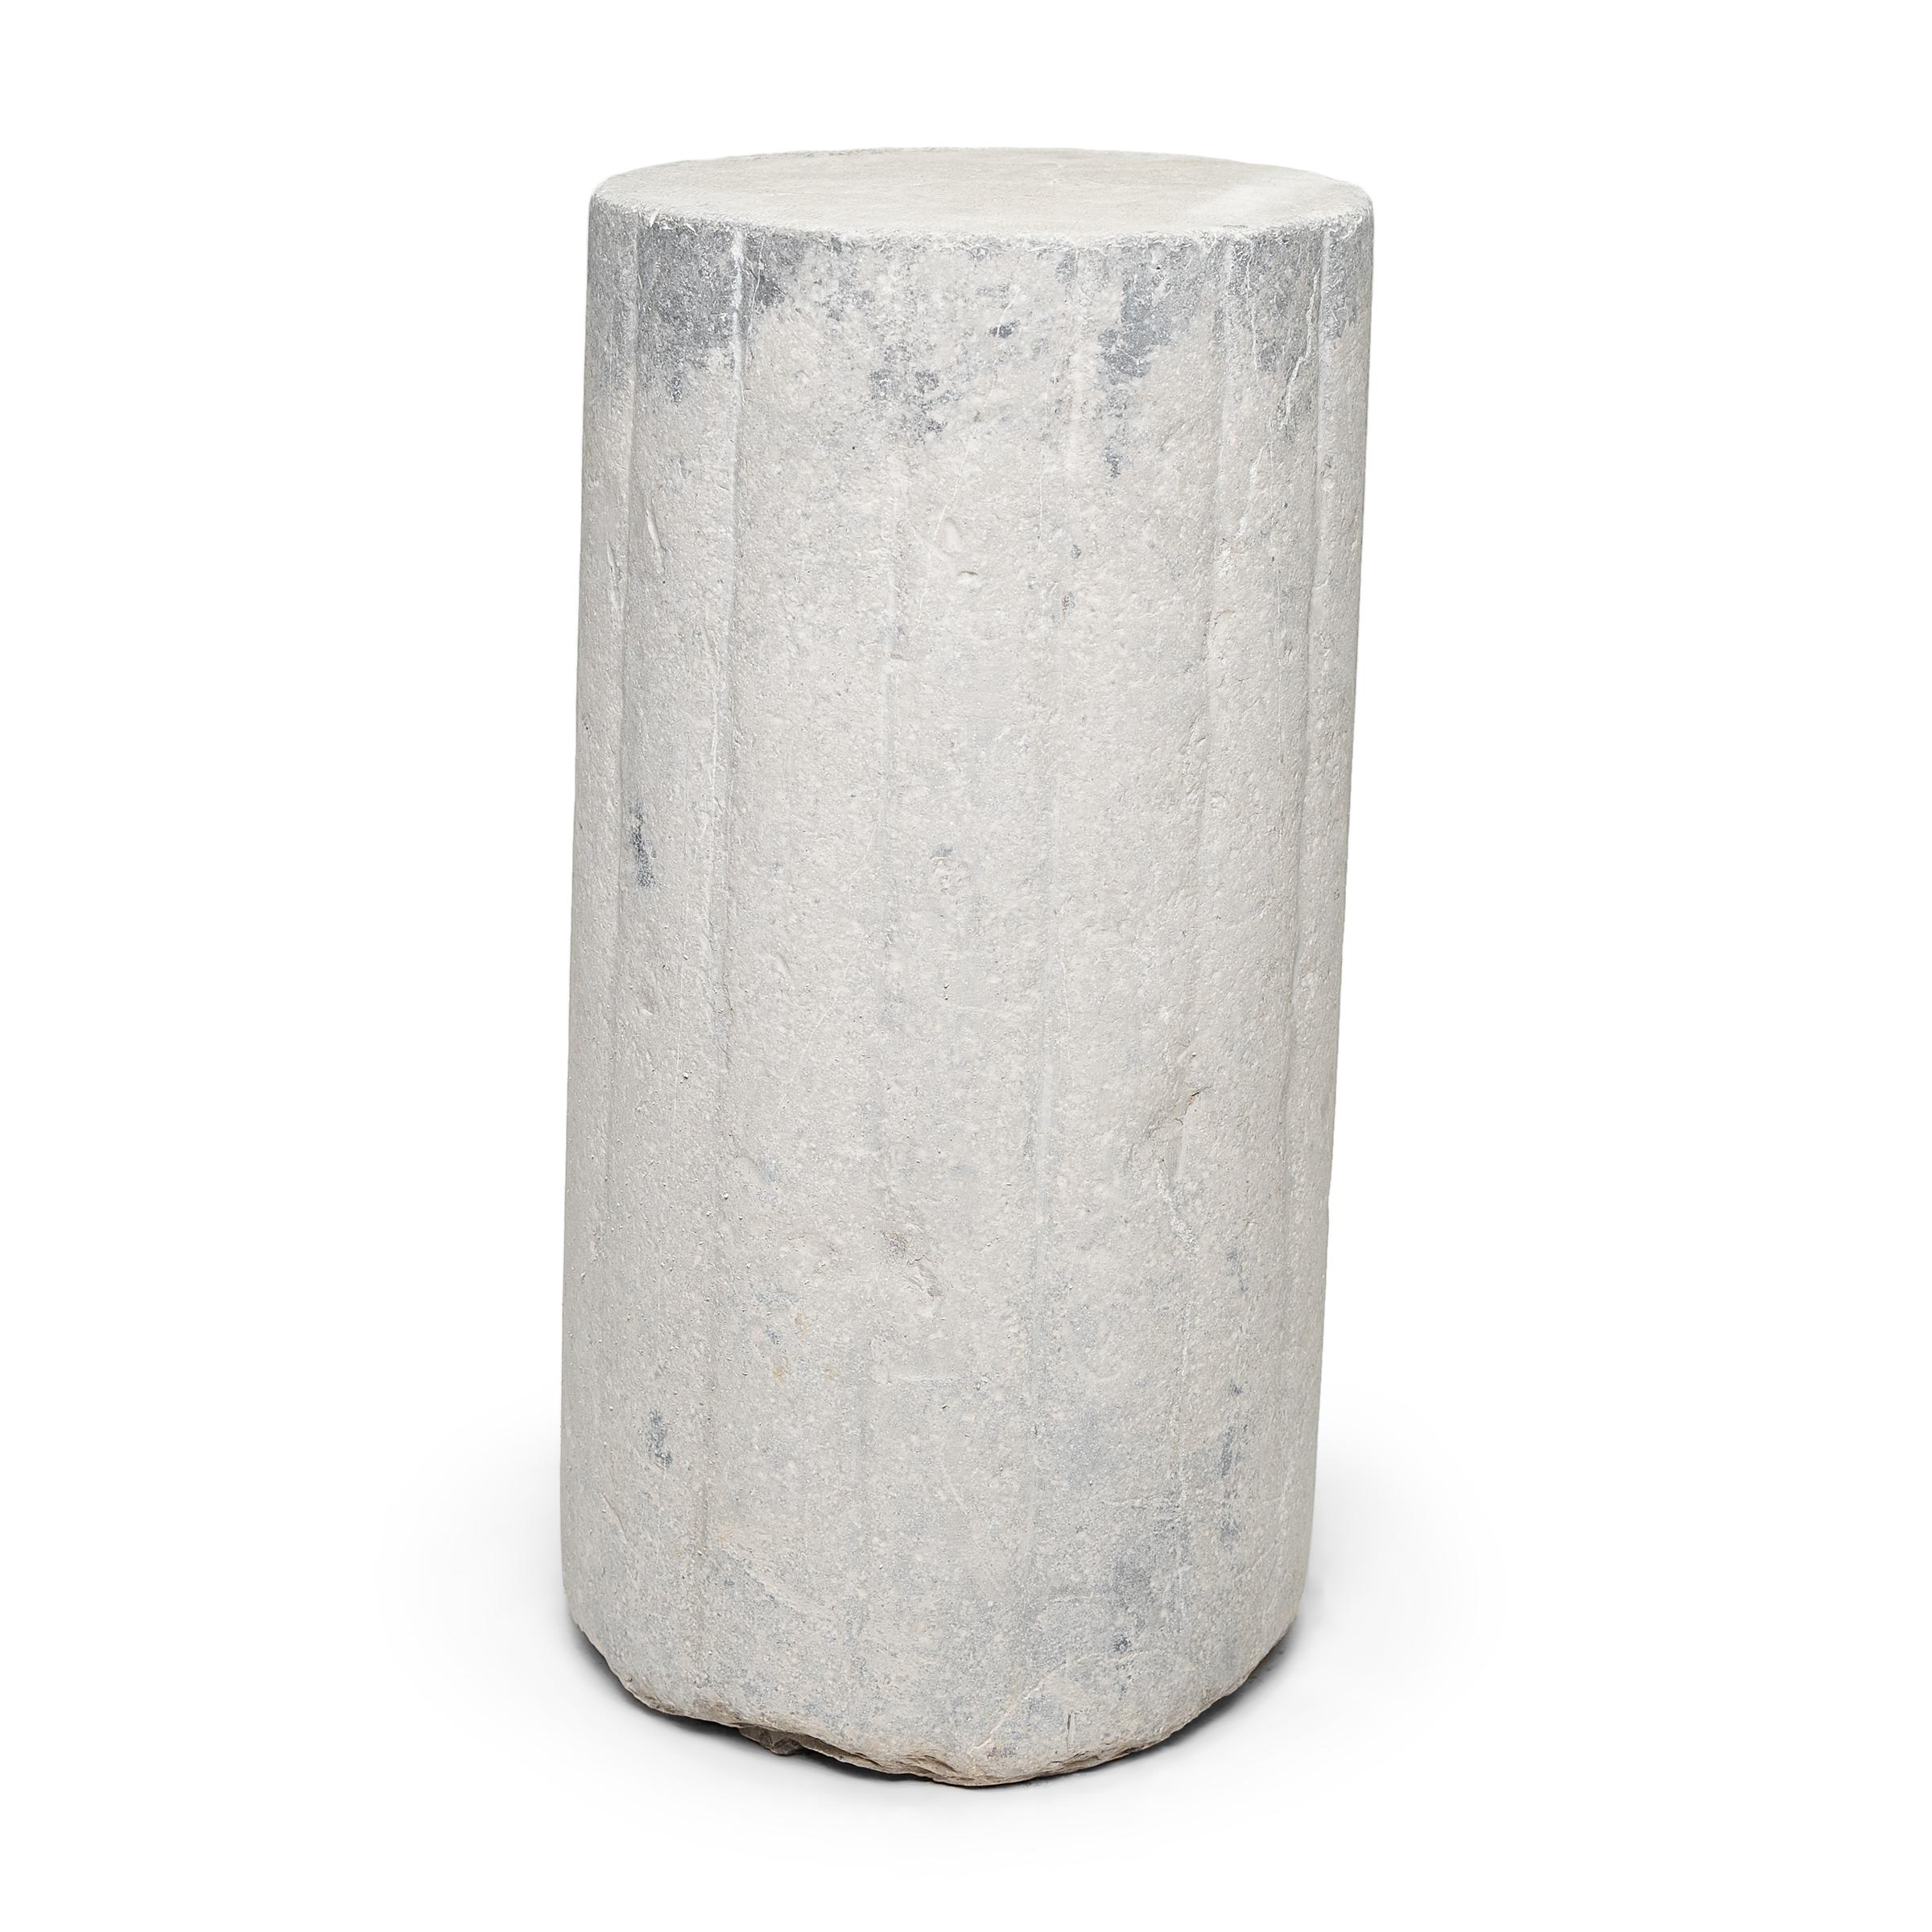 This unusual stone pedestal is actually a late 19th century cylindrical mill stone. hand carved of solid limestone with a textured and ribbed surface, the stone was used for threshing wheat and other grains on a farm in China's Shanxi province. The